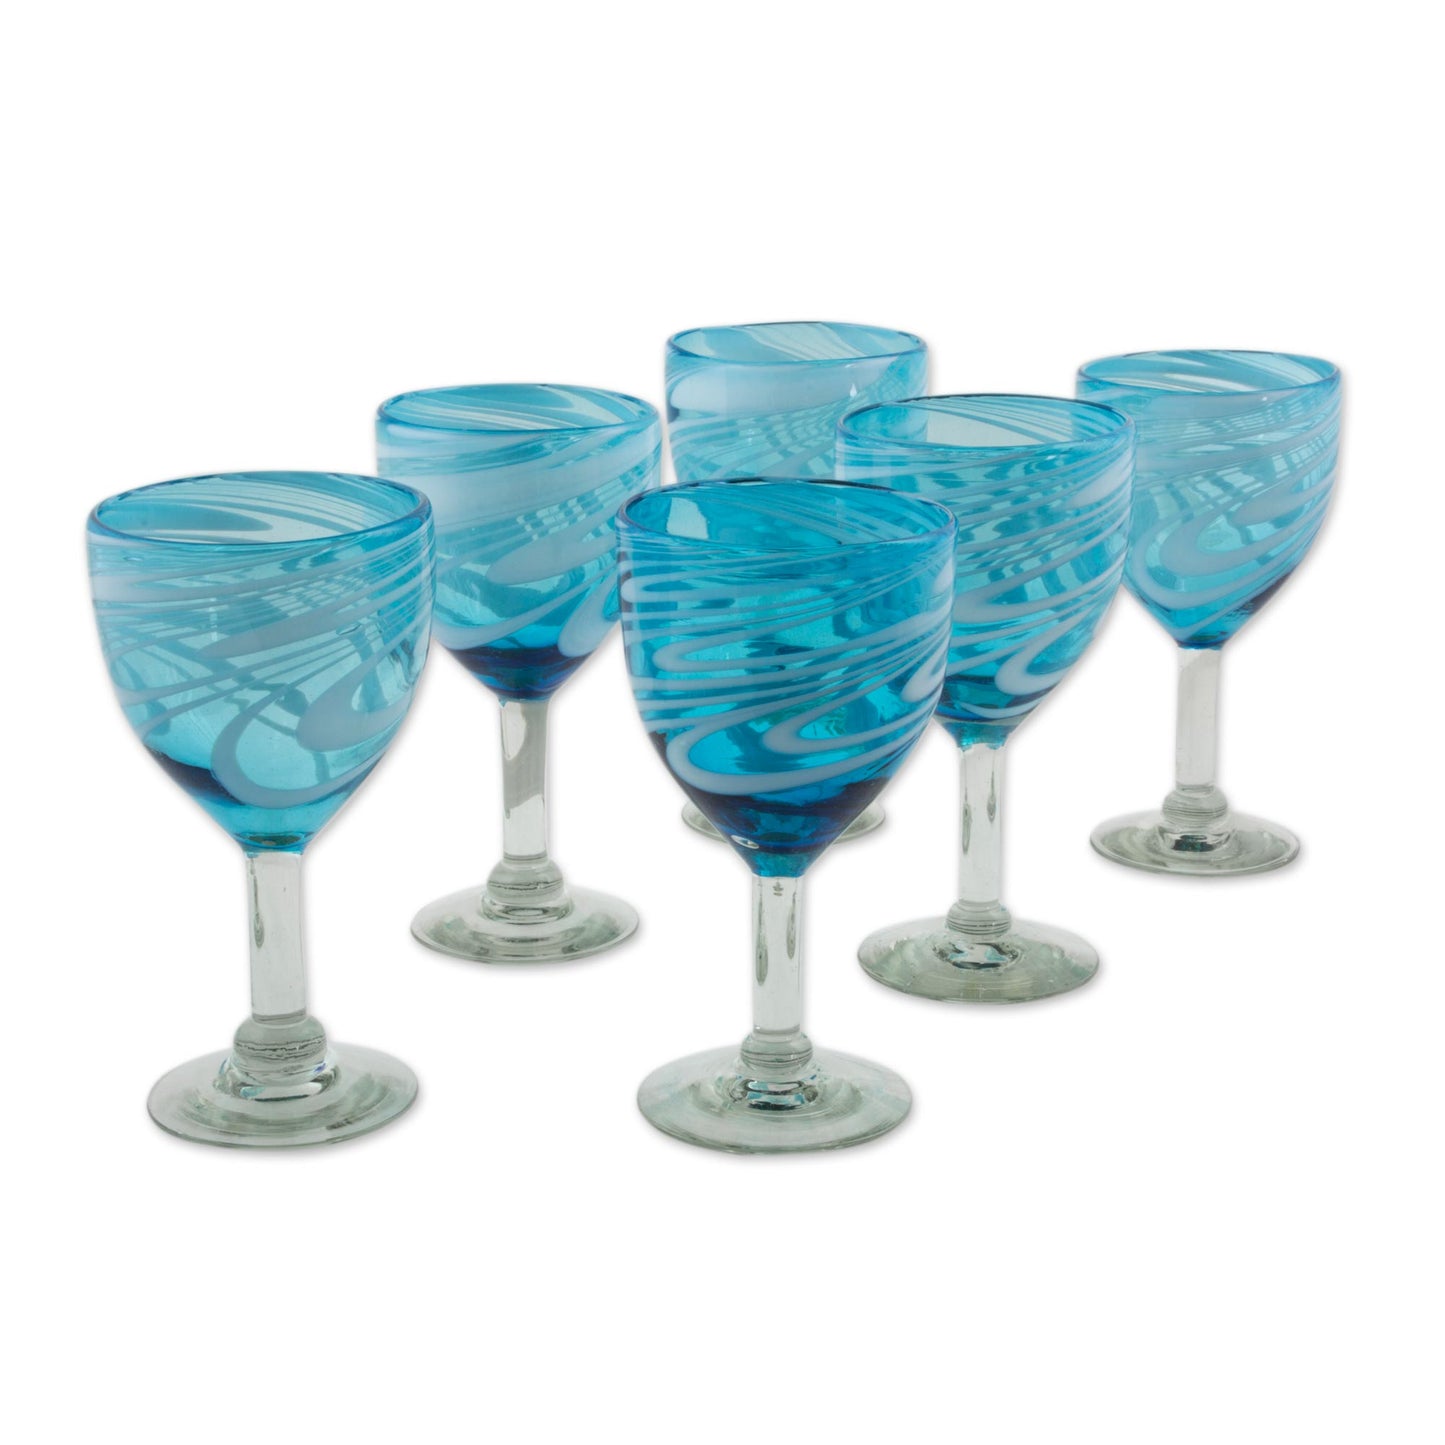 Whirling Aquamarine 6 Hand Blown Wine Glasses in Aqua and White from Mexico